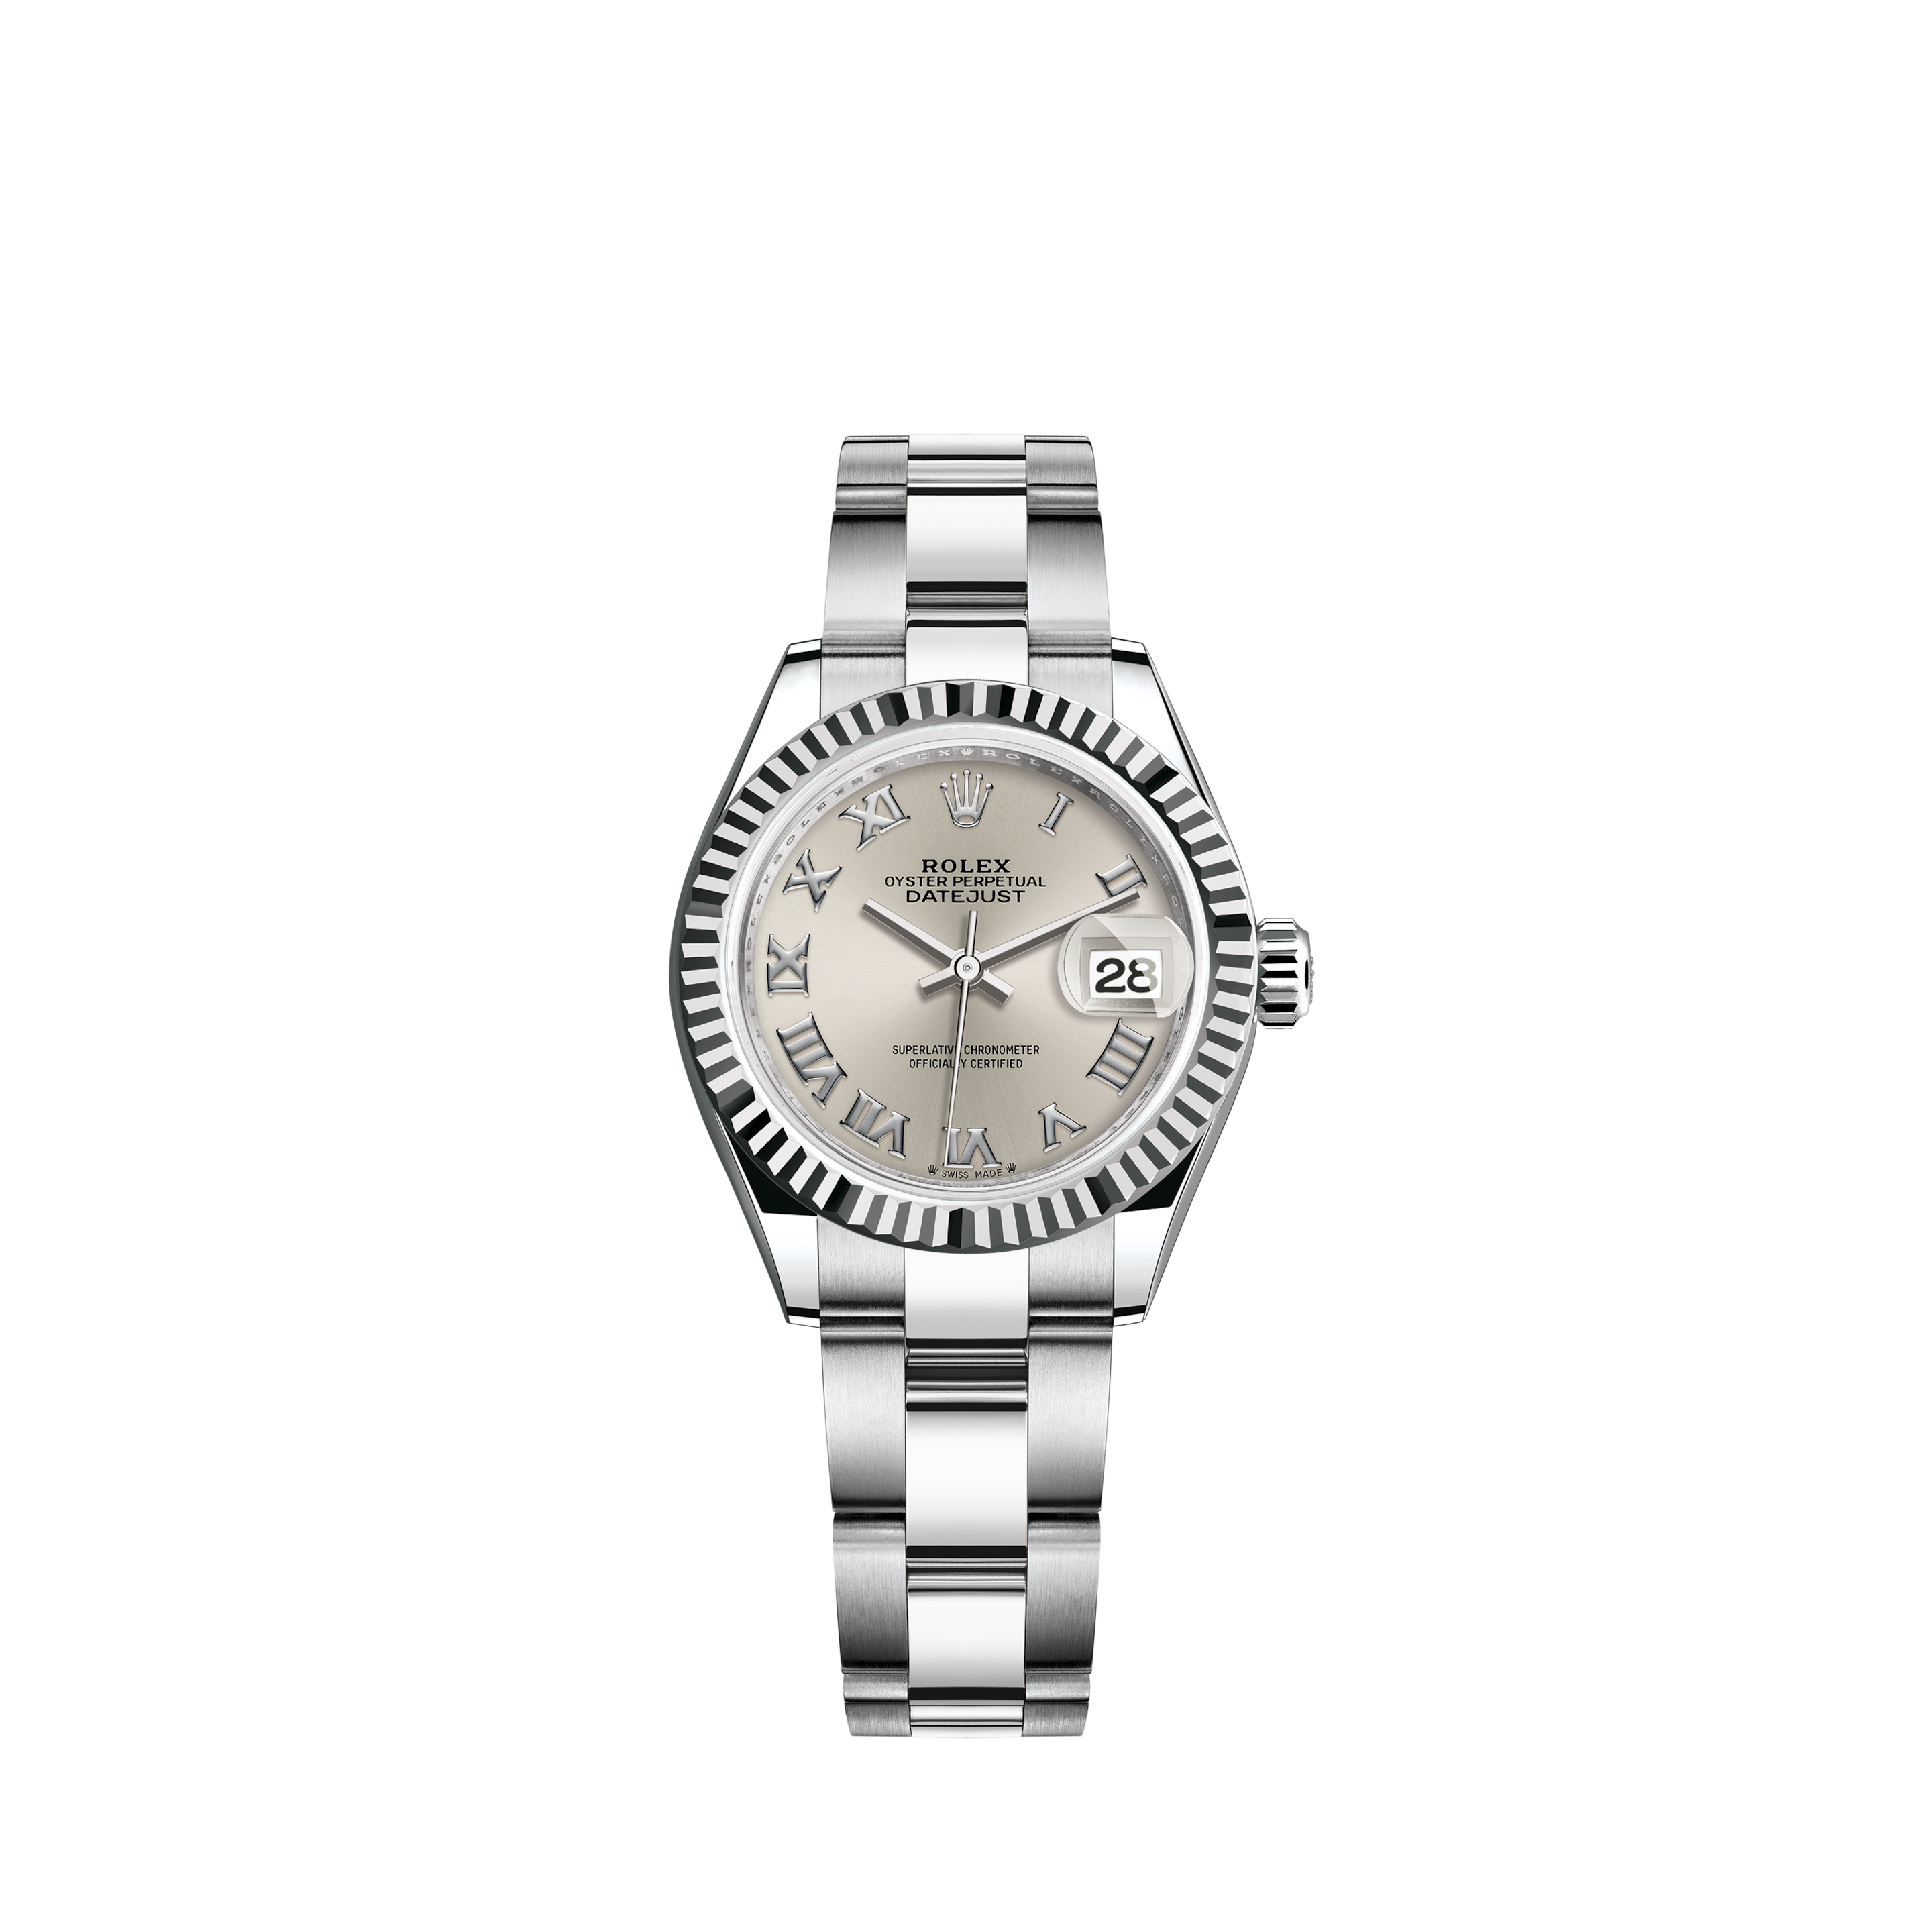 Rolex Datejust II Stainless Steel white Gold Factory Diamond Dial Watch 116334